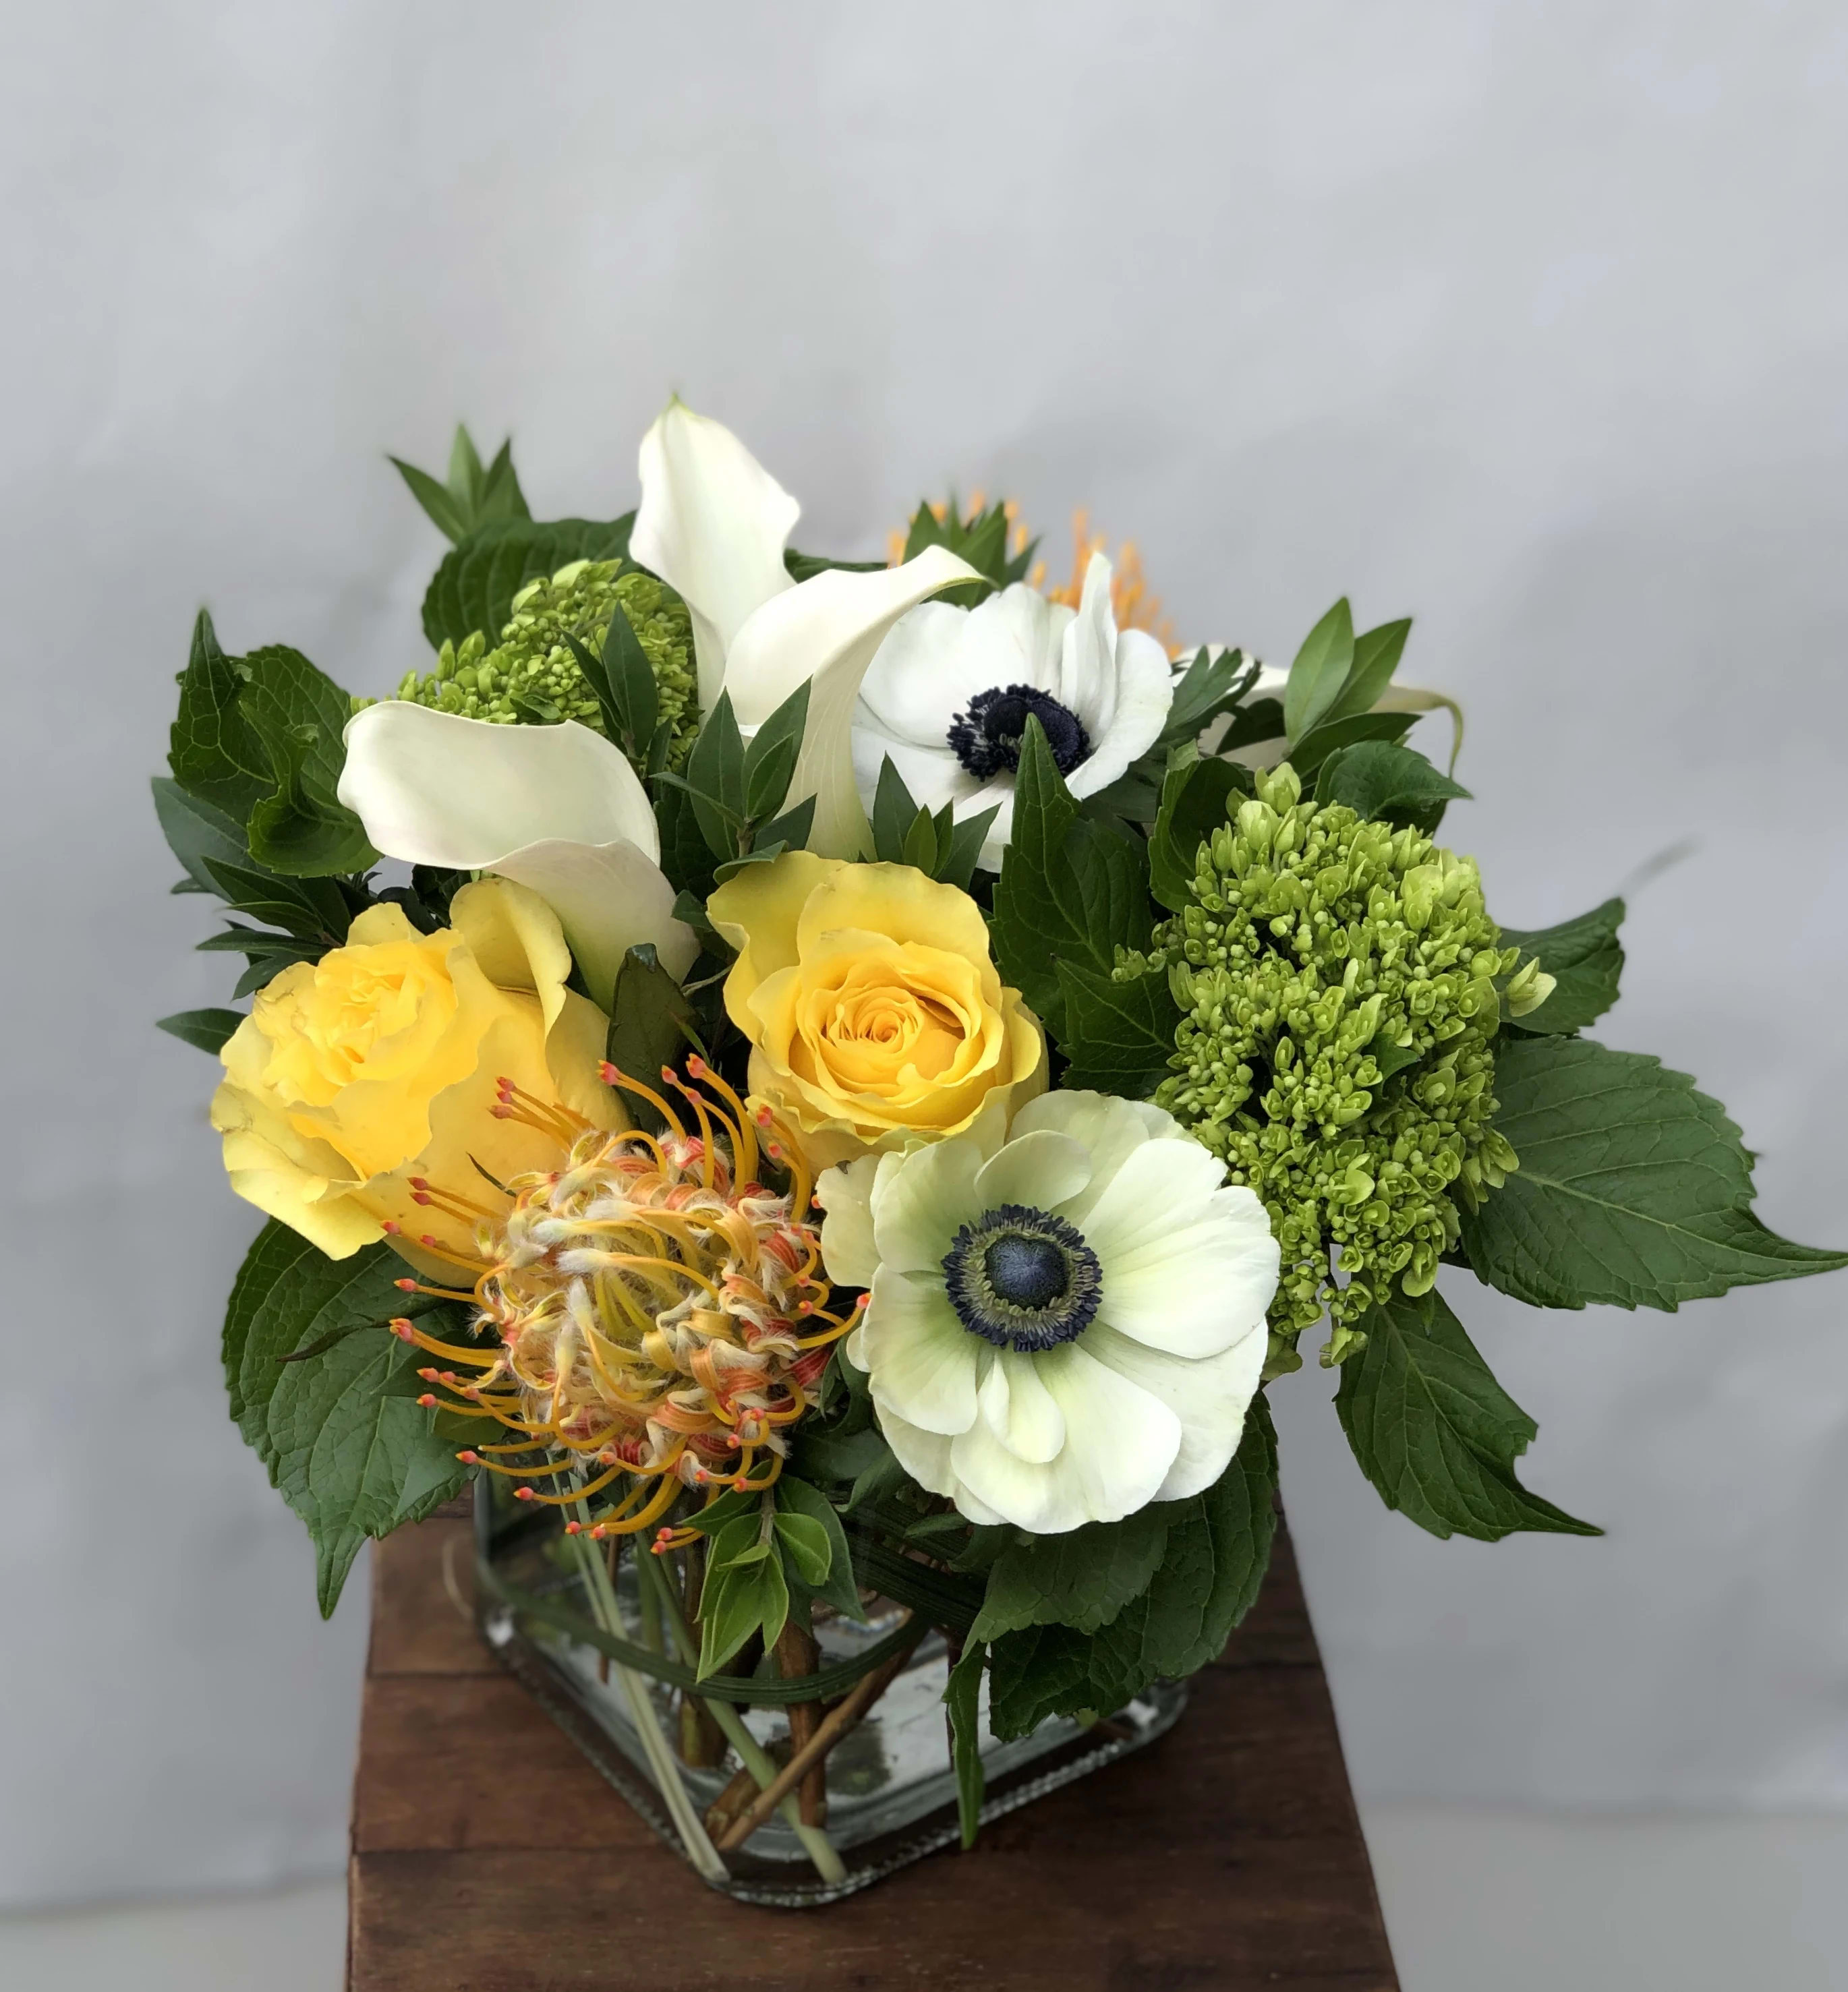 Protea Perfection - This arrangement features stunning pincushion proteas, mini green hydrangea, white anemones, yellow roses and callas.